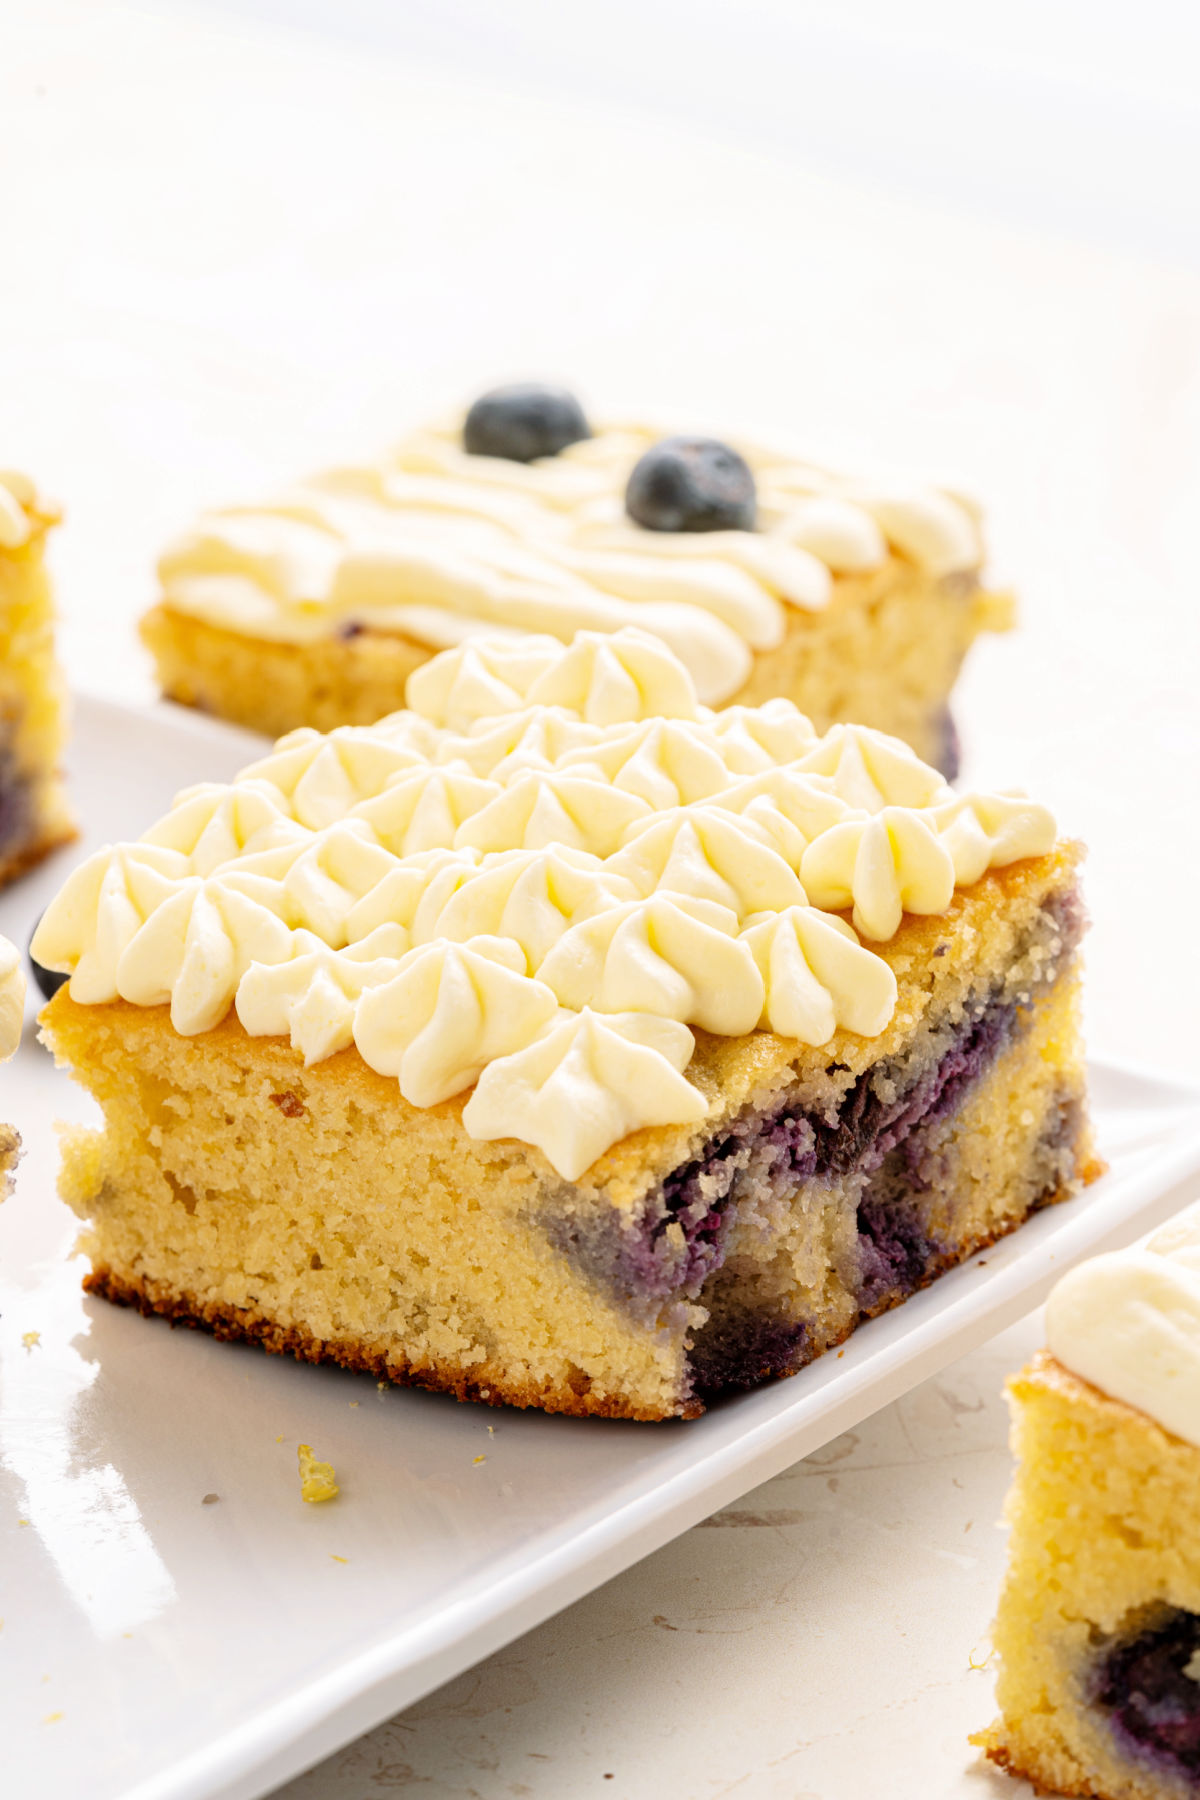 Blueberry cake with frosting on a white plate.